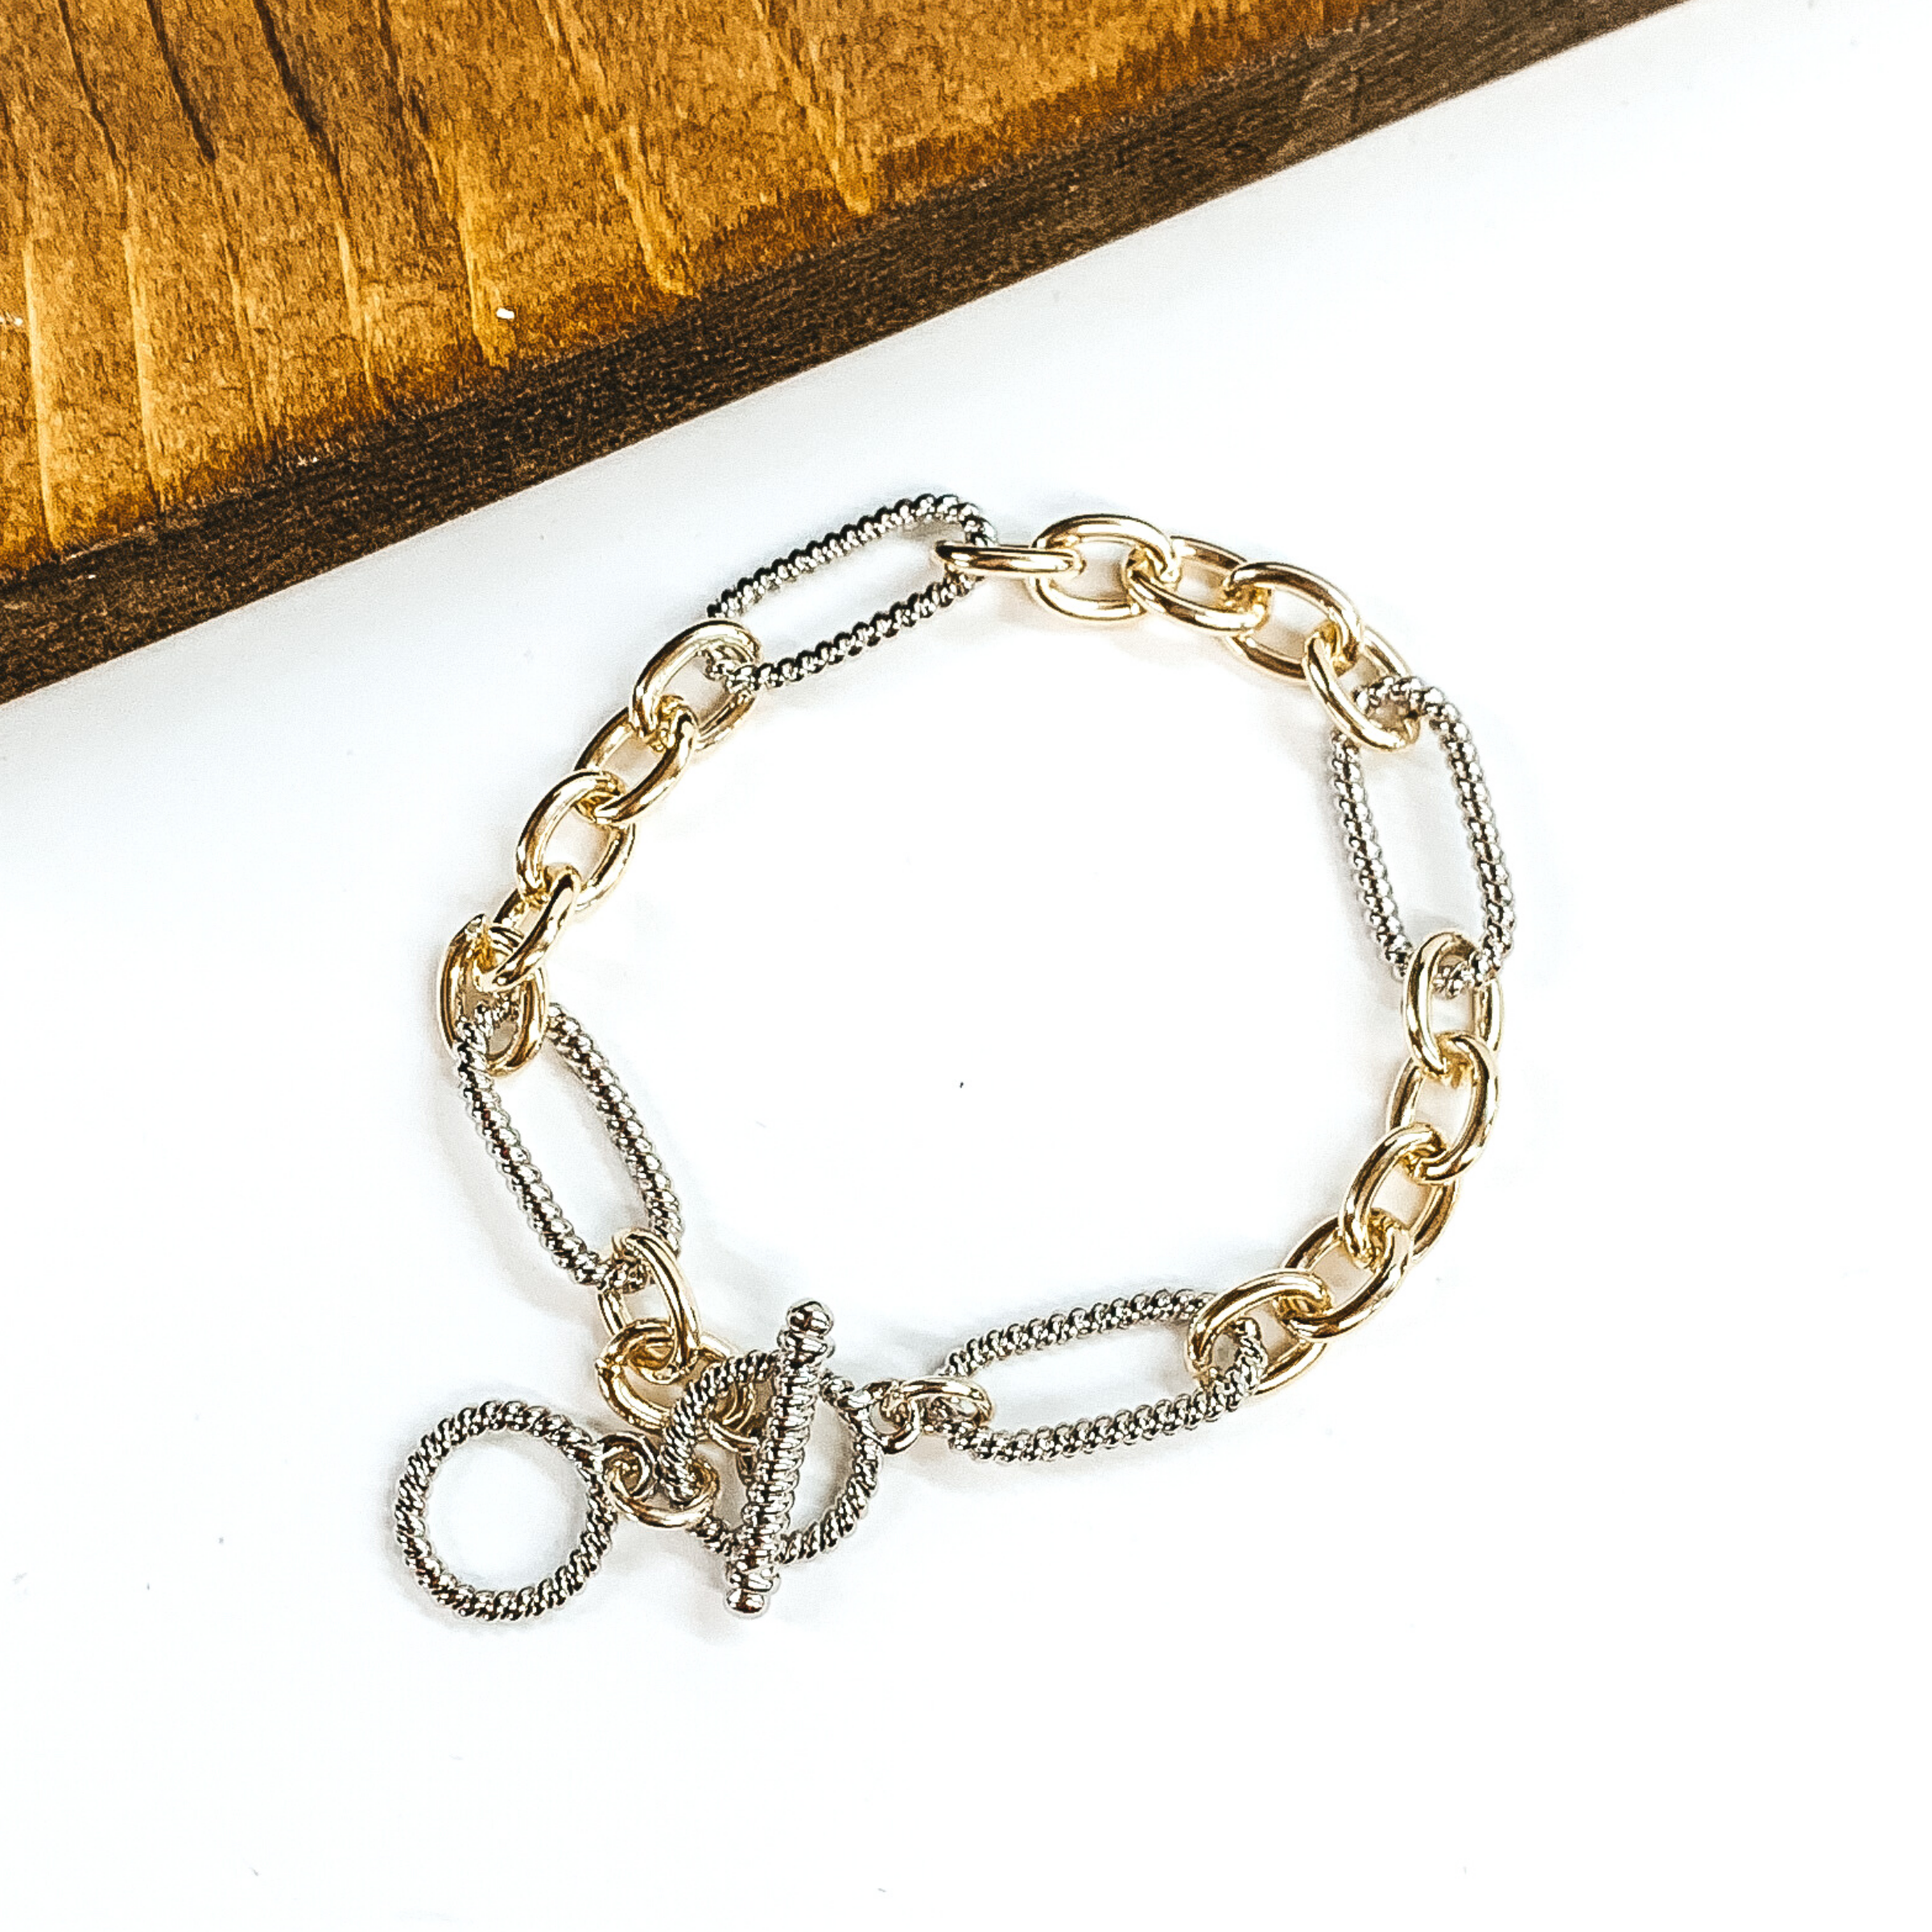 Thin, twisted, silver chains linked with small, thin gold chains. This bracelet has a toggle clasp. This bracelet is pictured on a white background. 